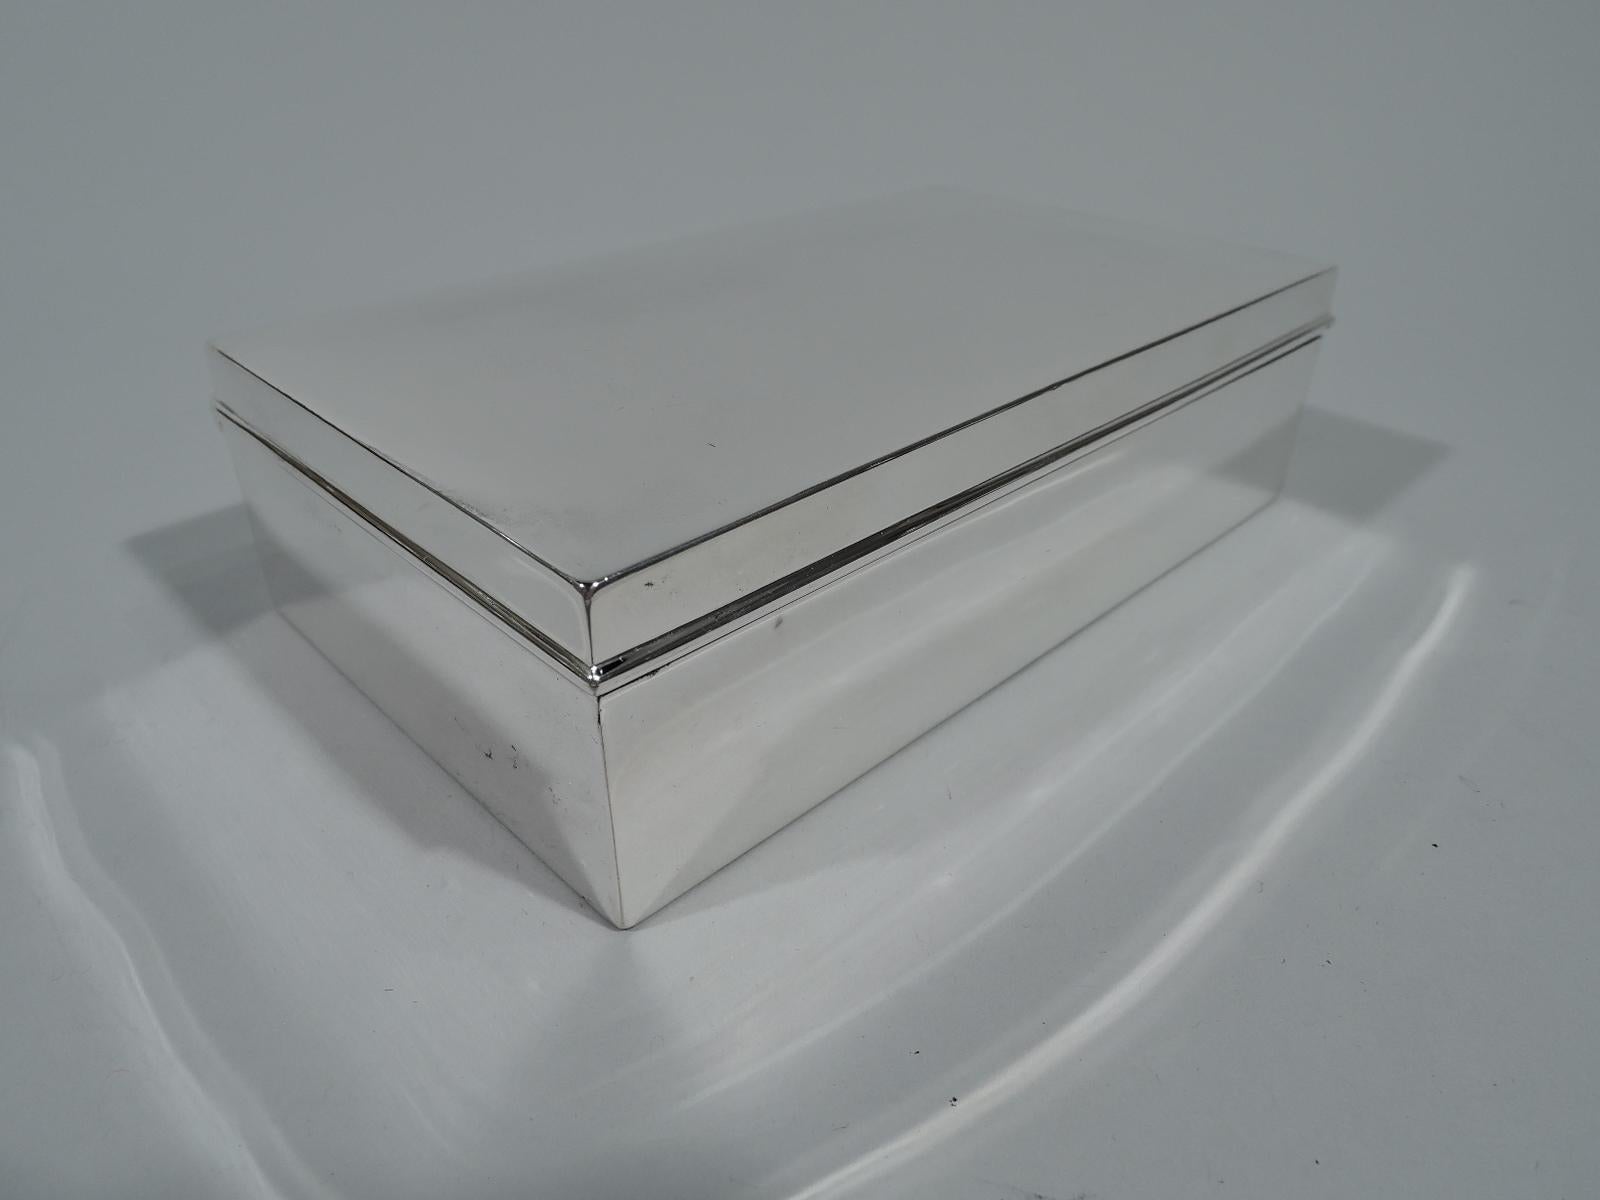 Modern sterling silver box. Made by Tiffany & Co. in New York. Rectangular with straight sides. Cover hinged and gently curved with molded rim. Box interior cedar lined. Cover interior gilt. Hallmark includes pattern no. 19572 (first produced in